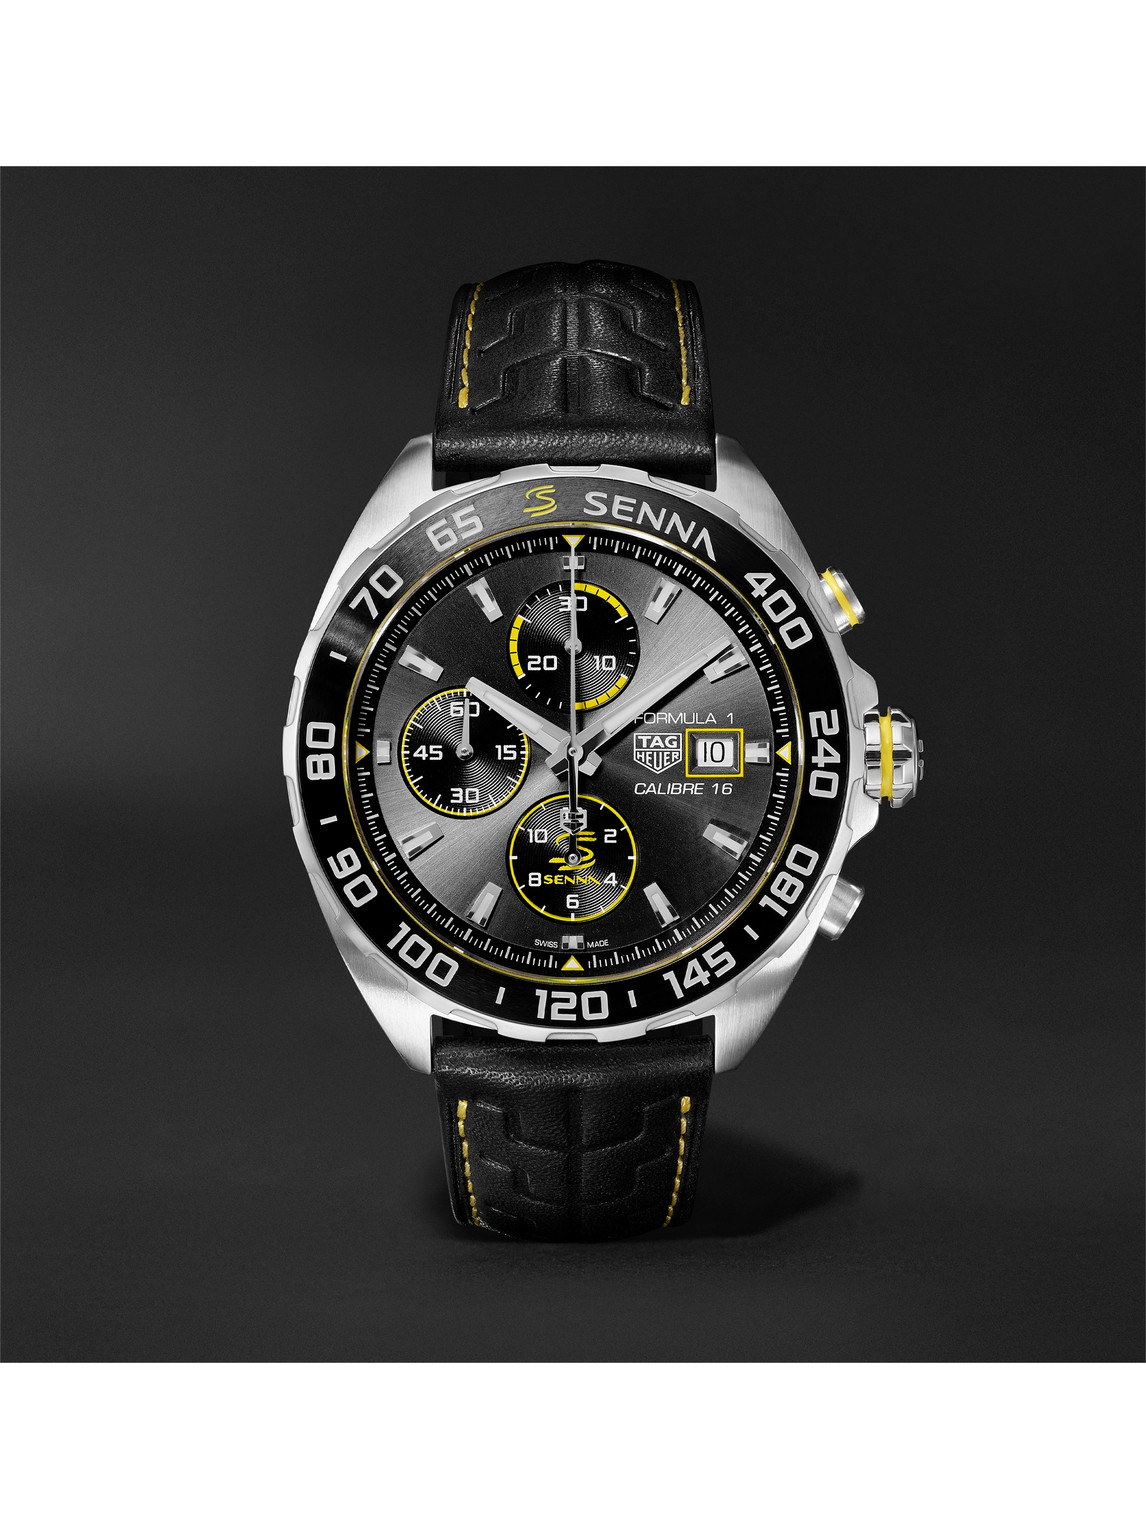 Formula 1 x Senna Chronograph 44mm Stainless Steel and Leather Watch, Ref. No. CAZ201B.FC6487